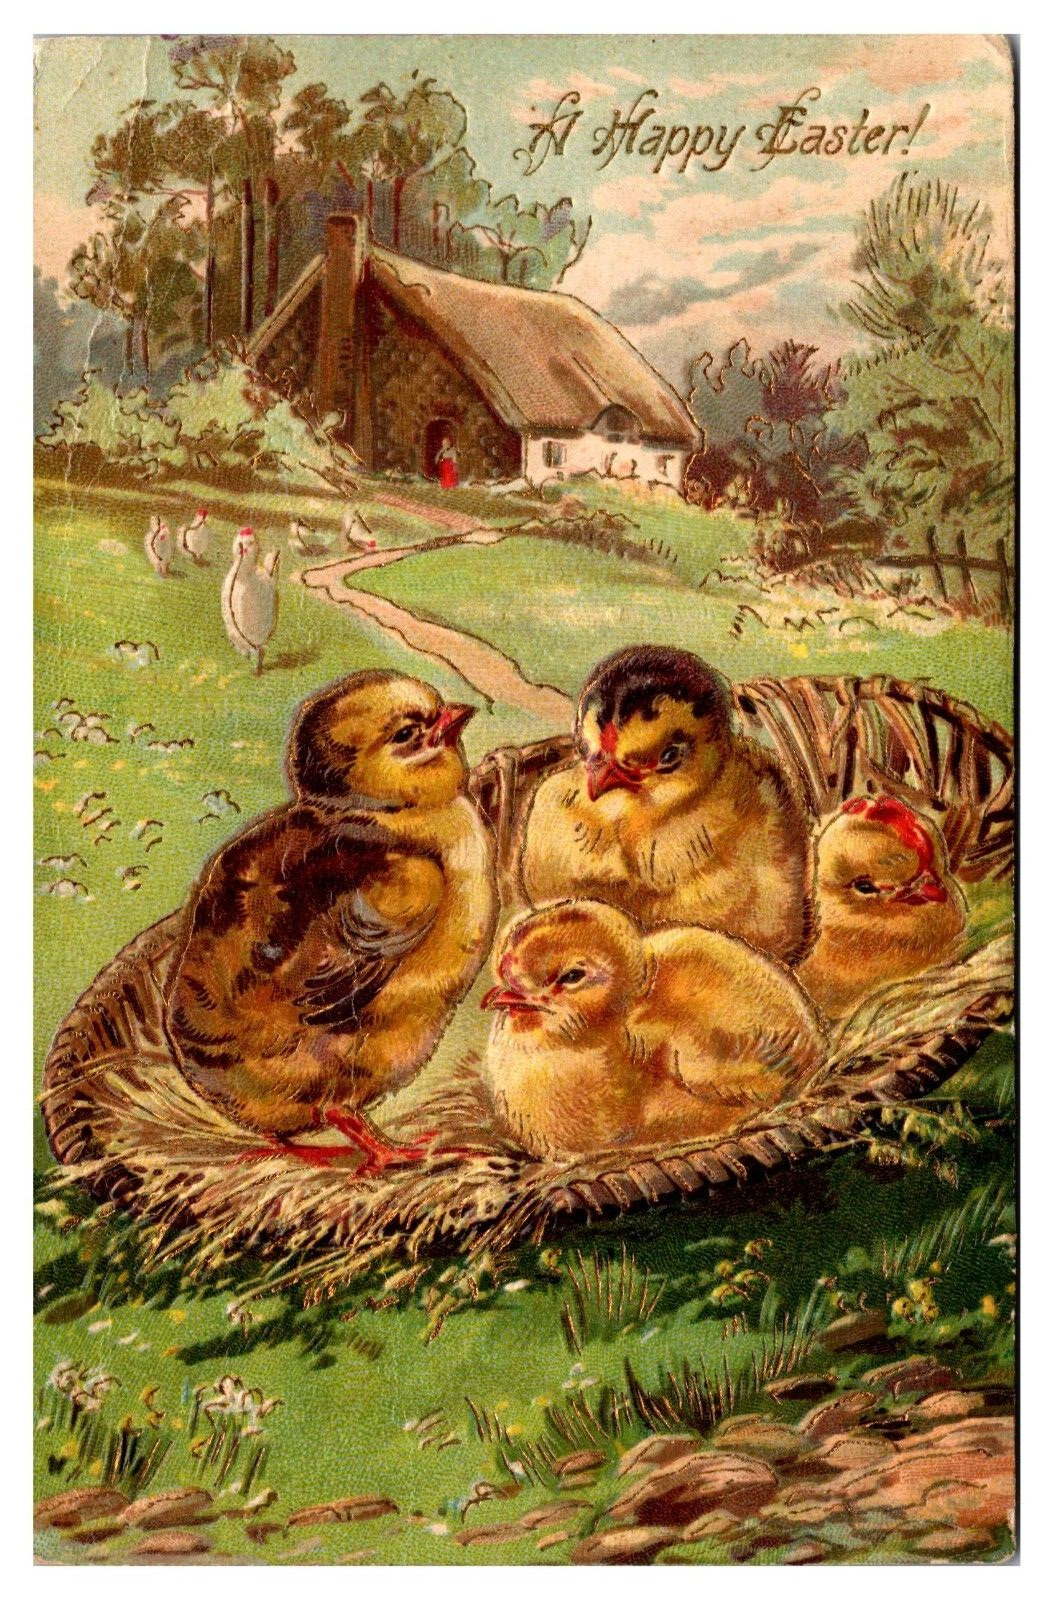 1908 A Happy Easter, Chicks in a Basket, Country Scene, Postcard